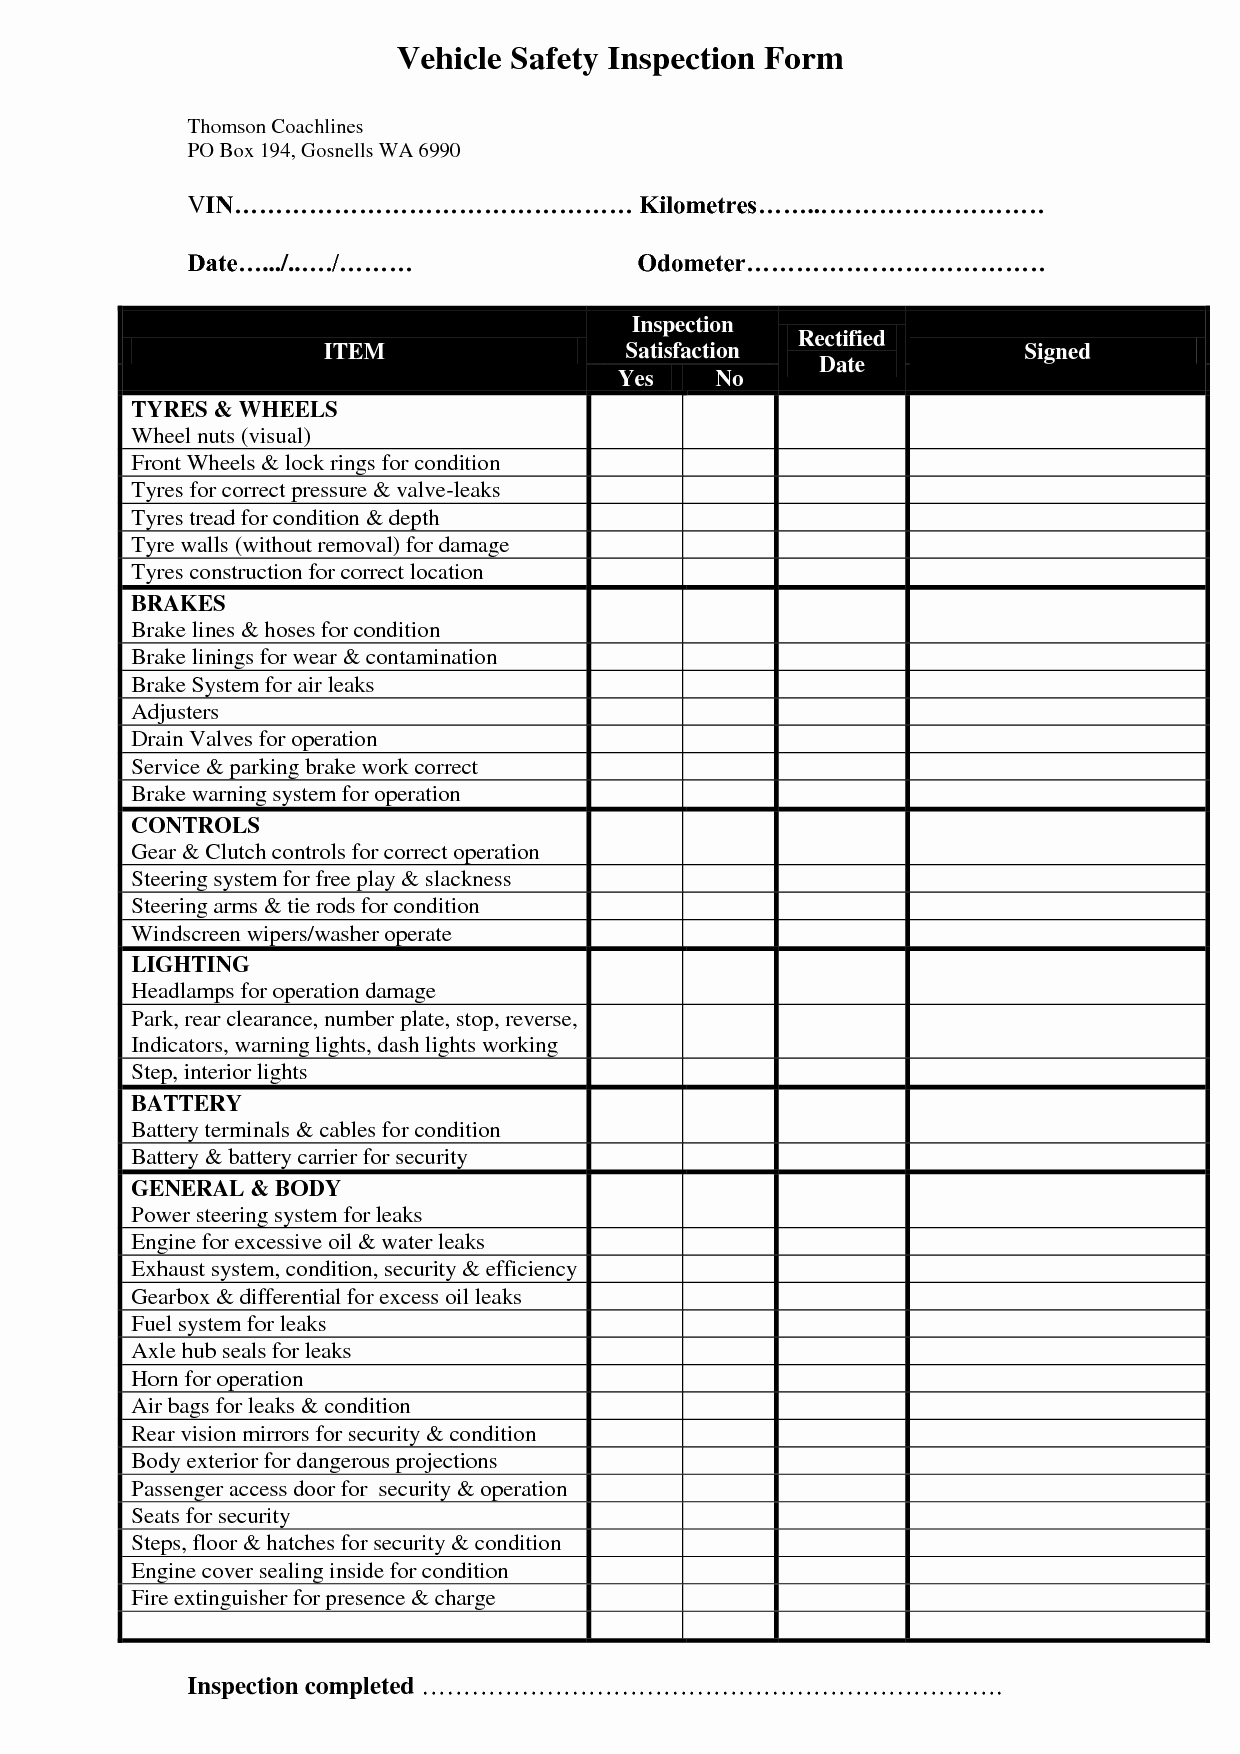 Vehicle Inspection Checklist Template Beautiful Vehicle Safety Inspection form Safety Inspection forms